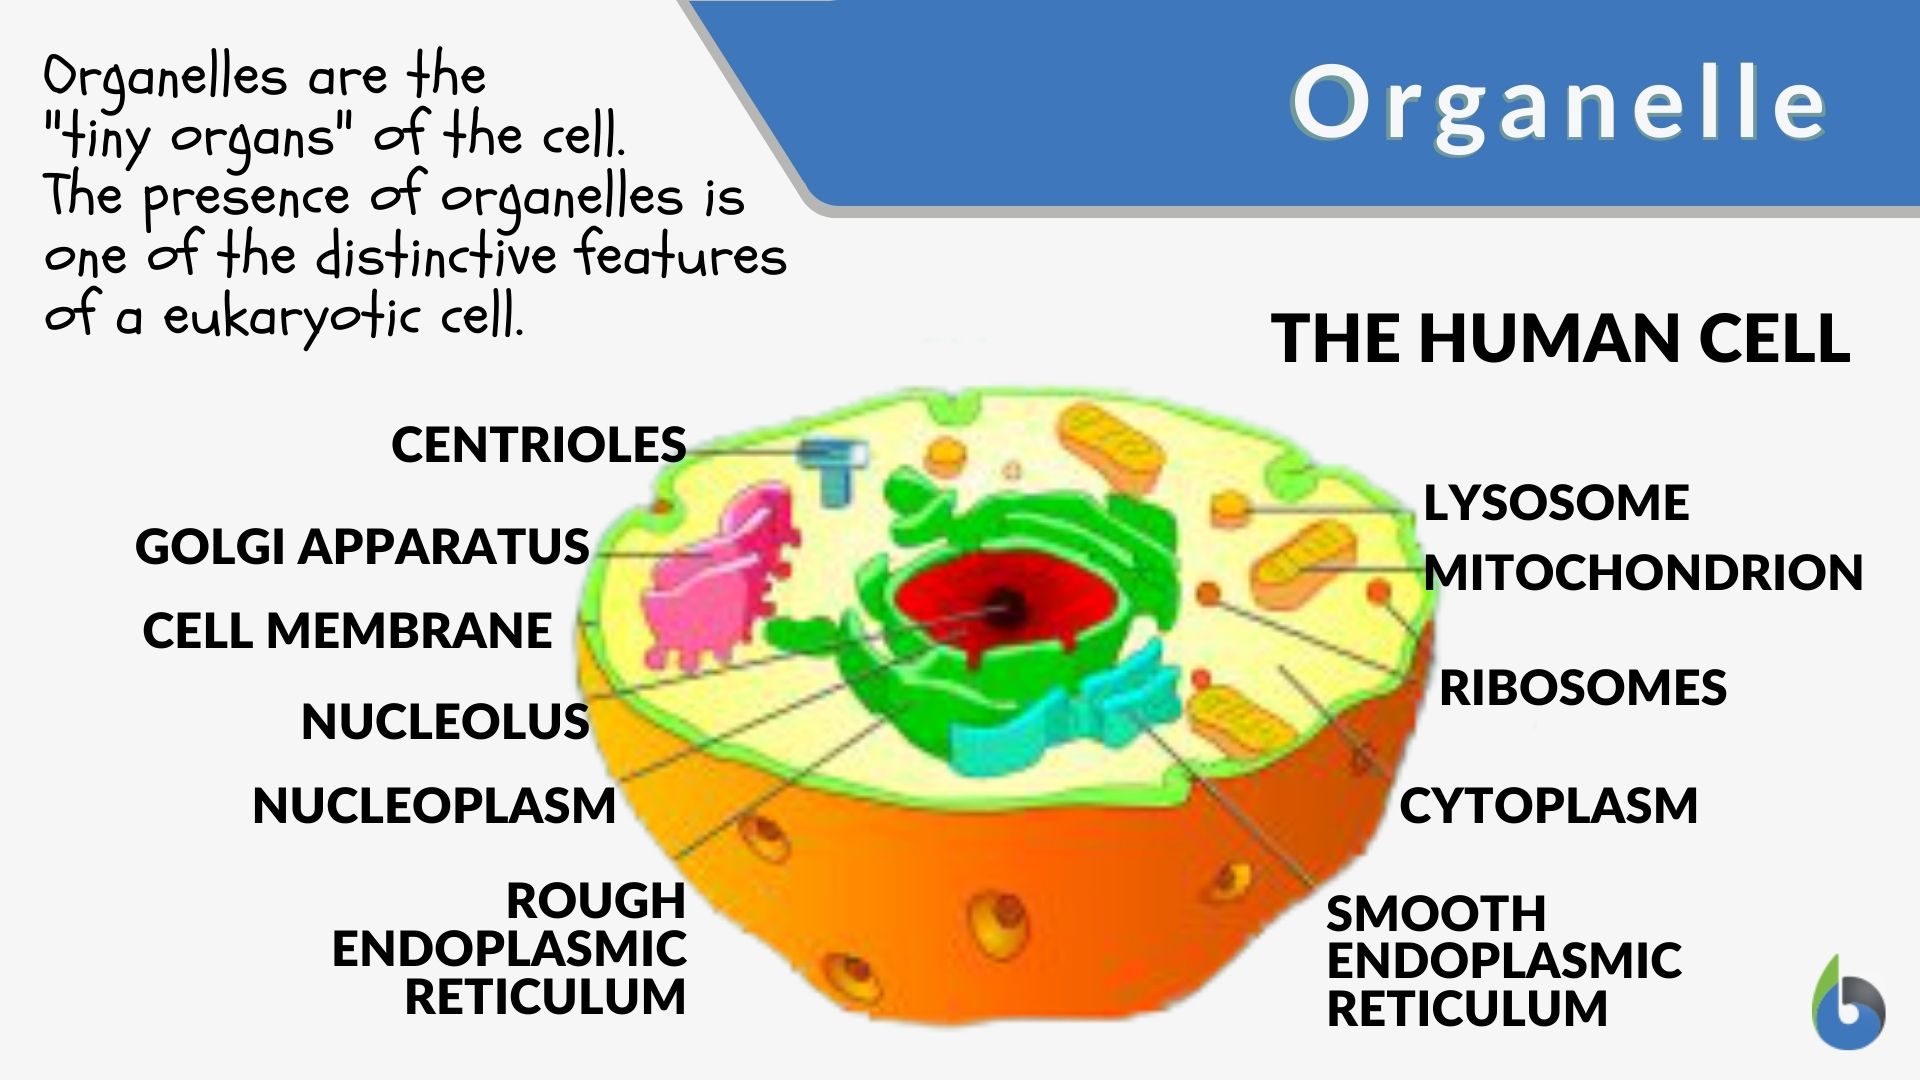 synthesis of lipids occurs in which major organelle